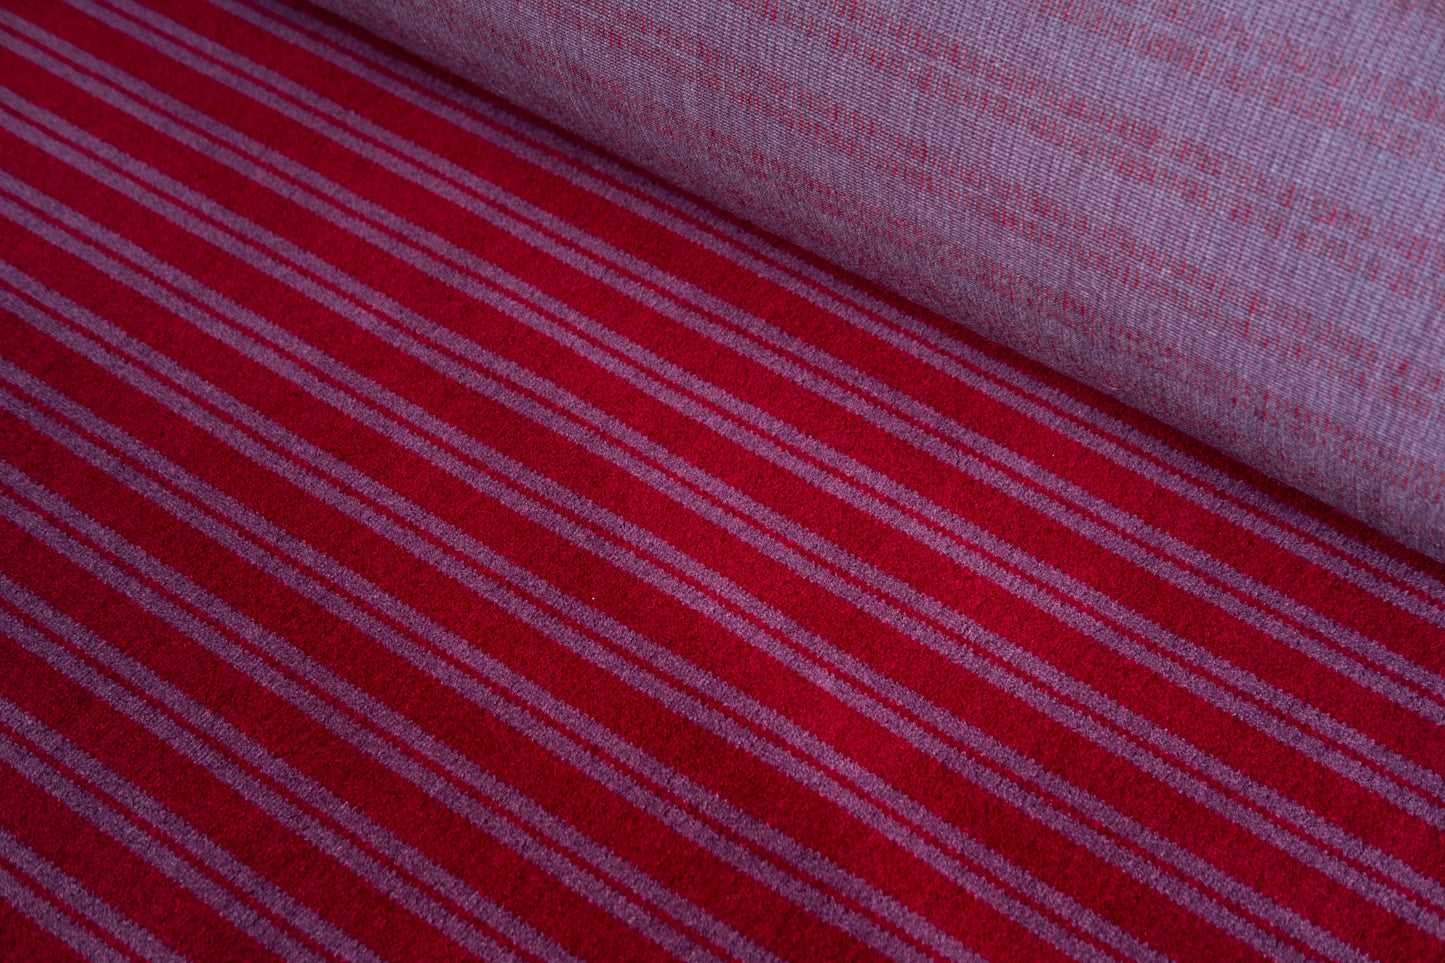 Gatwick Express Moquette Fabric Sold by the Metre